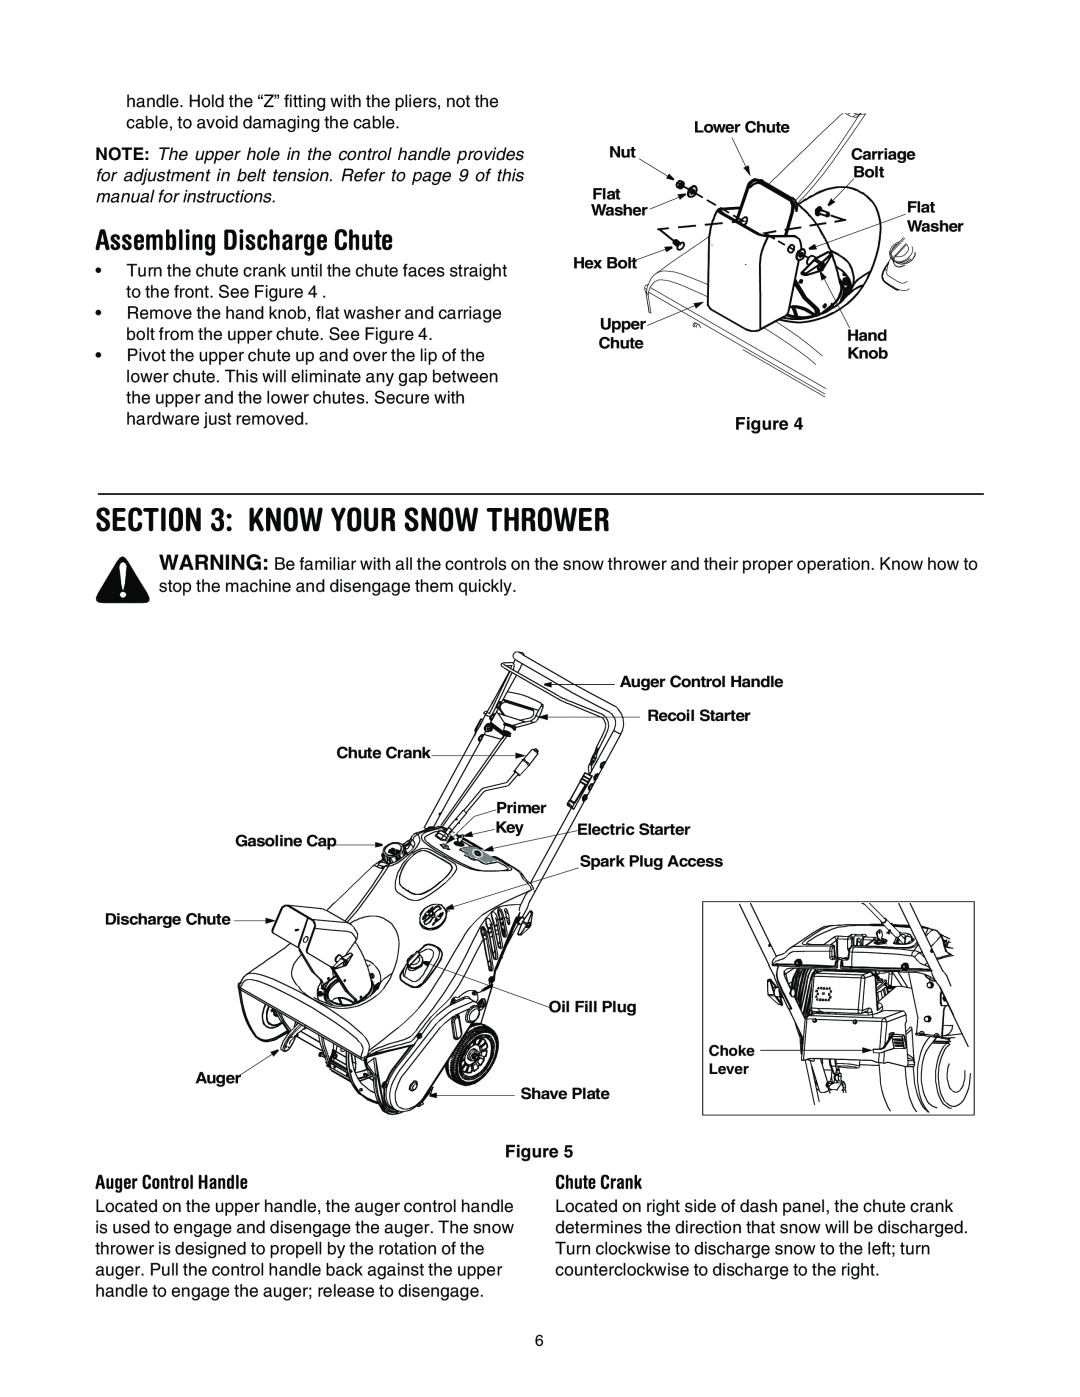 Troy-Bilt 521, 721 manual Know Your Snow Thrower, Assembling Discharge Chute, Auger Control Handle, Chute Crank 